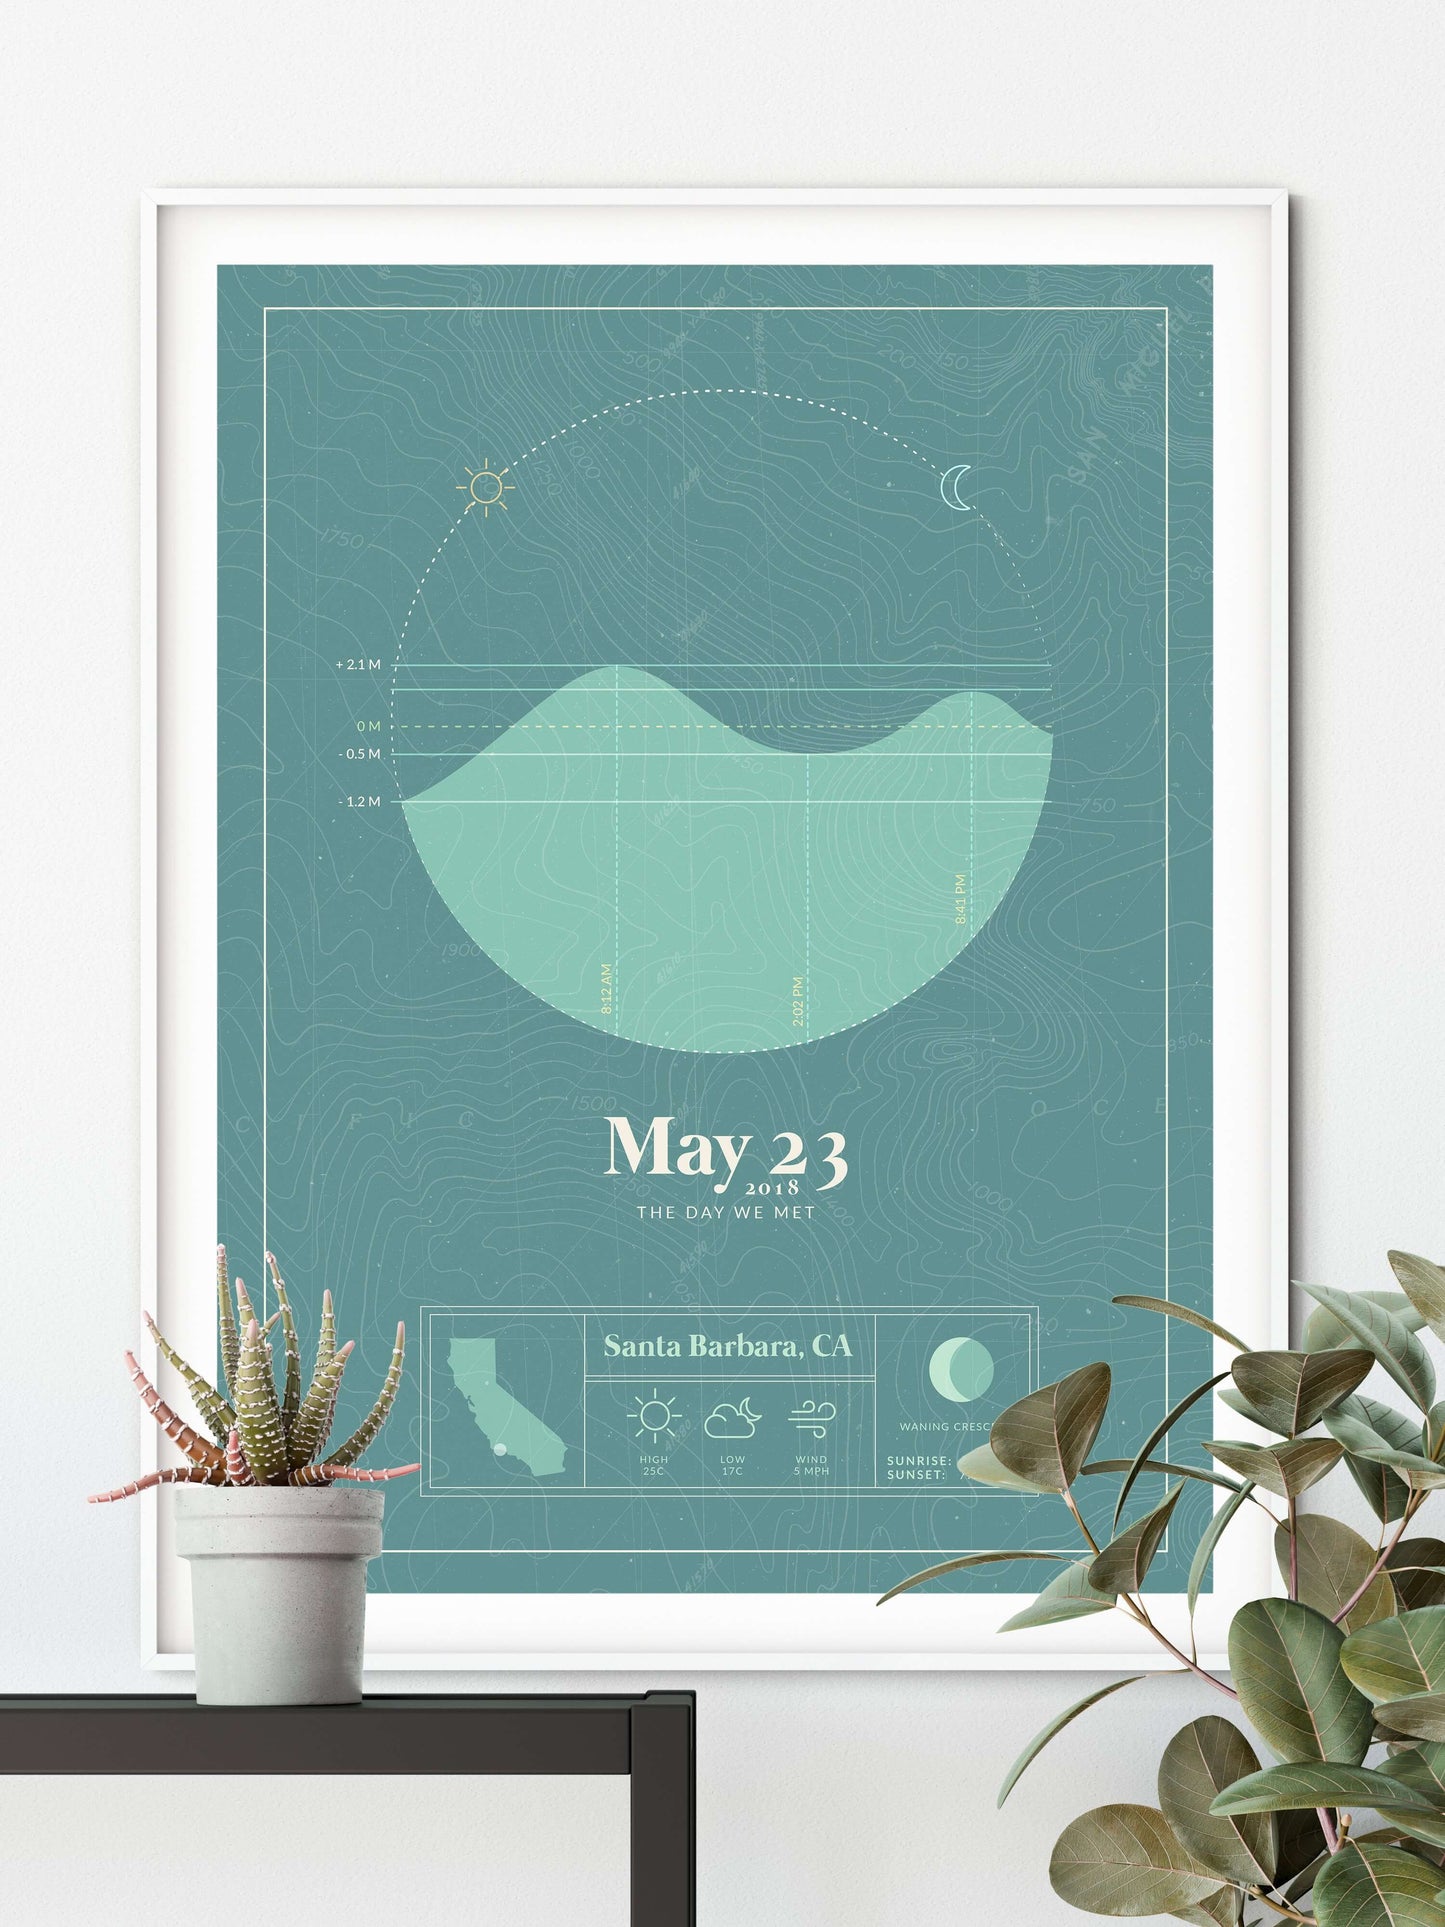 white framed picture of the personalized tide poster by salt atlas in the Tahiti teal color in a home setting. These are custom posters showing the tide, weather, and moon phase for a special day, like an anniversary or birthday.